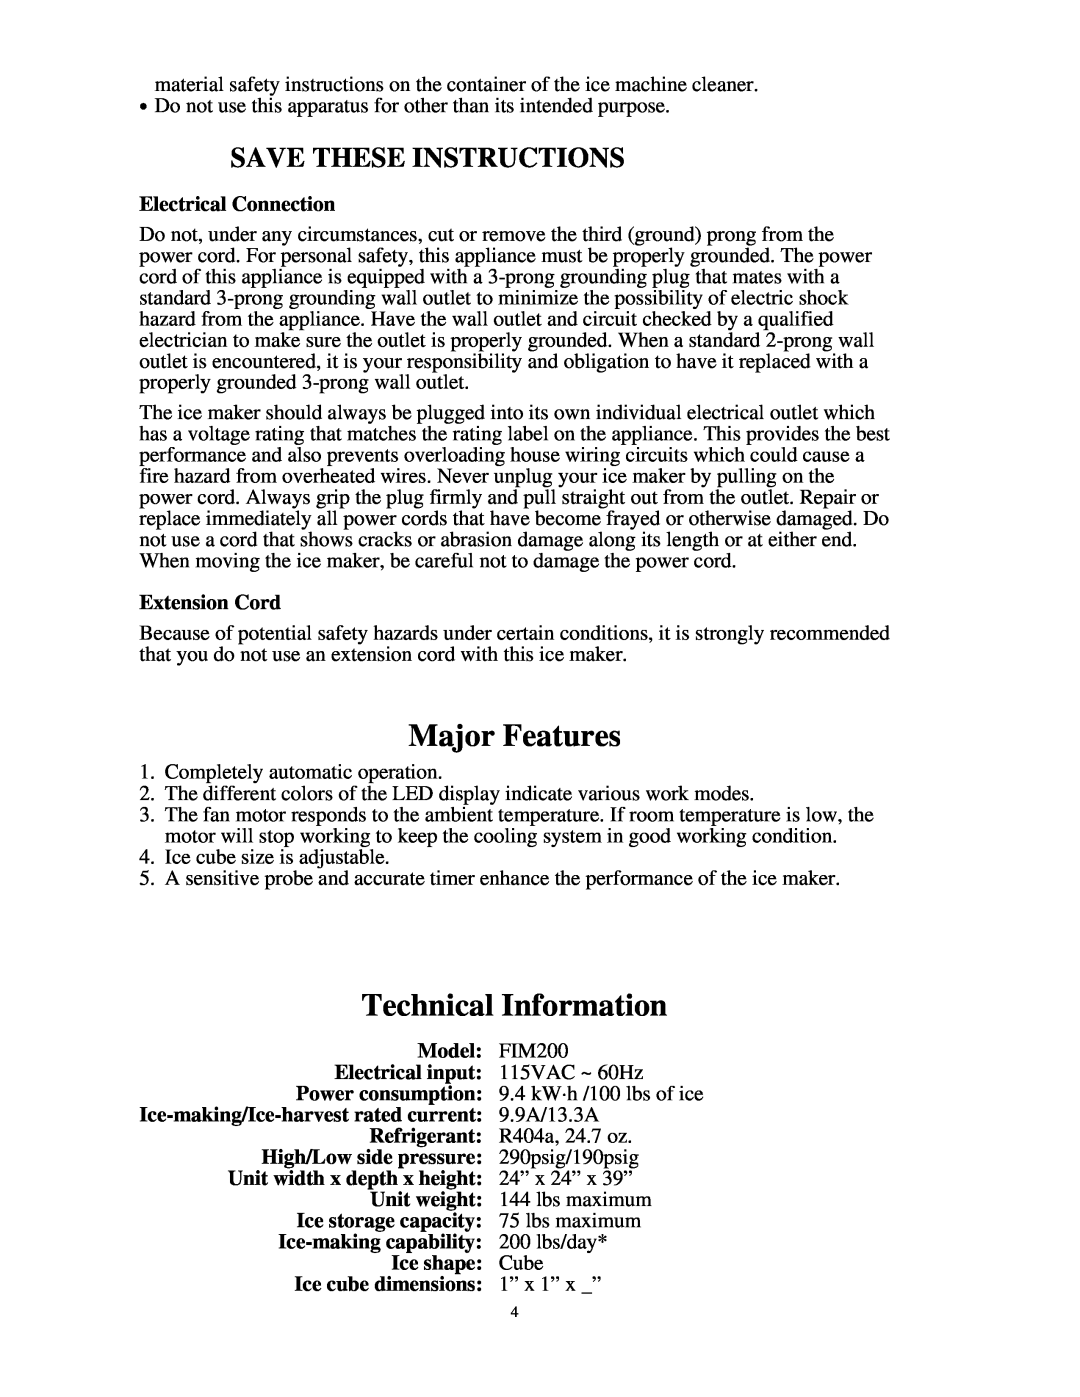 Franklin Industries, L.L.C FIM200 user manual Major Features, Technical Information, Save These Instructions 